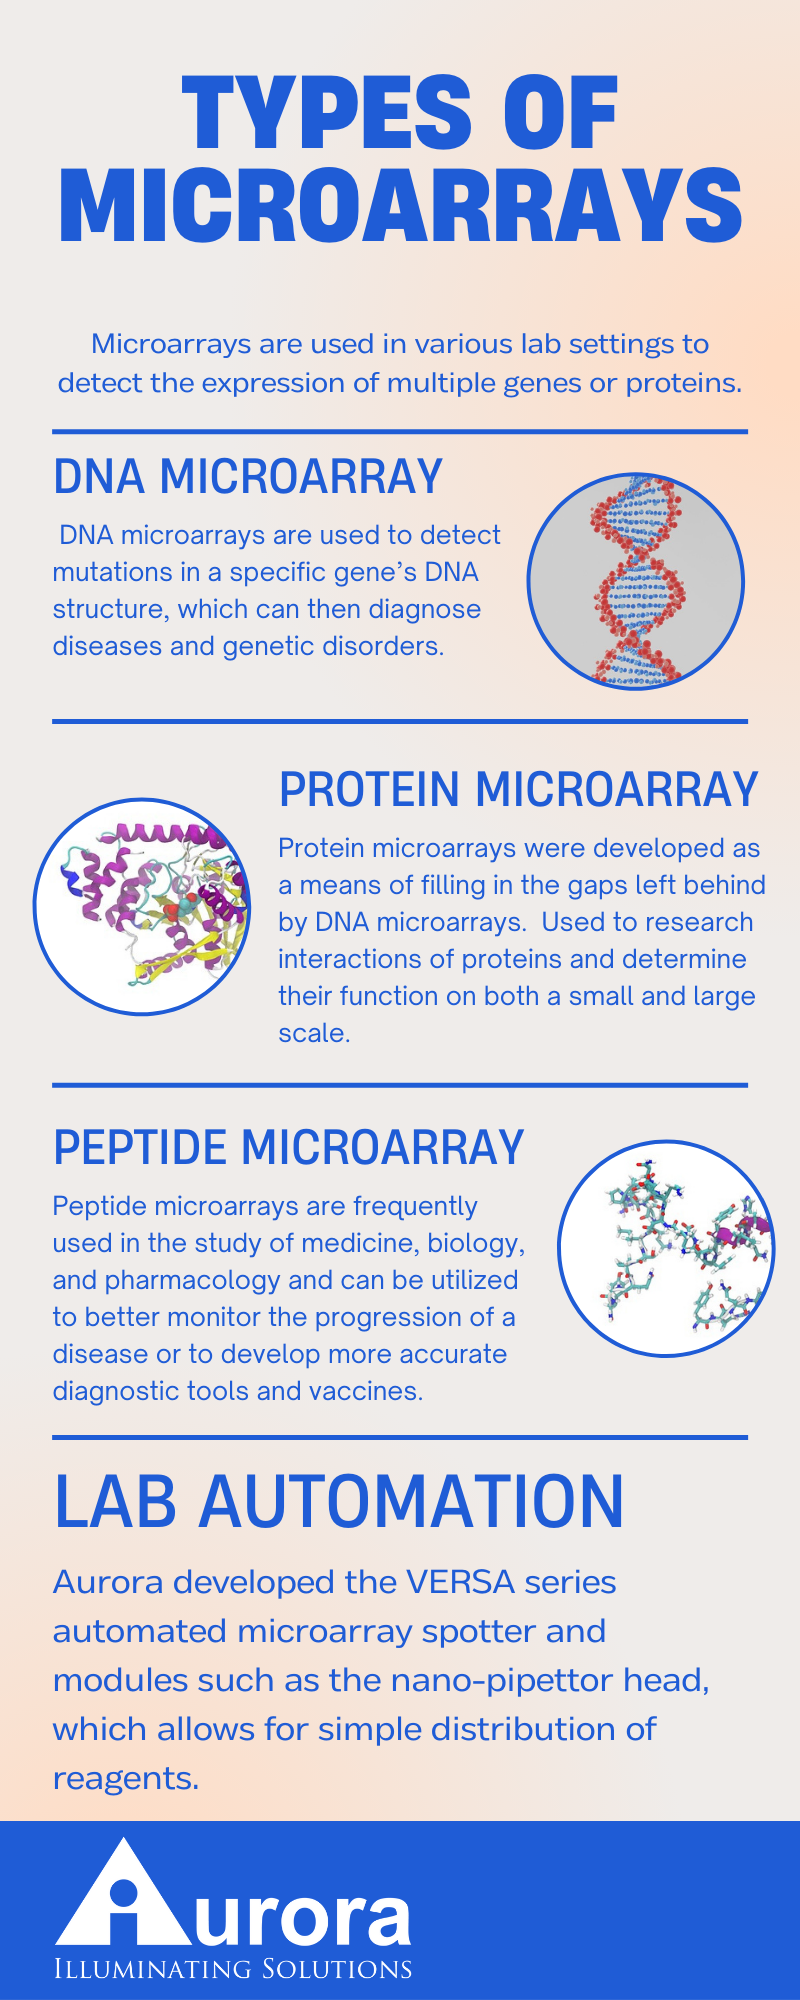 An infographic about the types of microarrays including; DNA, Protein, and peptide. Aurora biomed created a automated microarray spotter able to automatically print microarrays